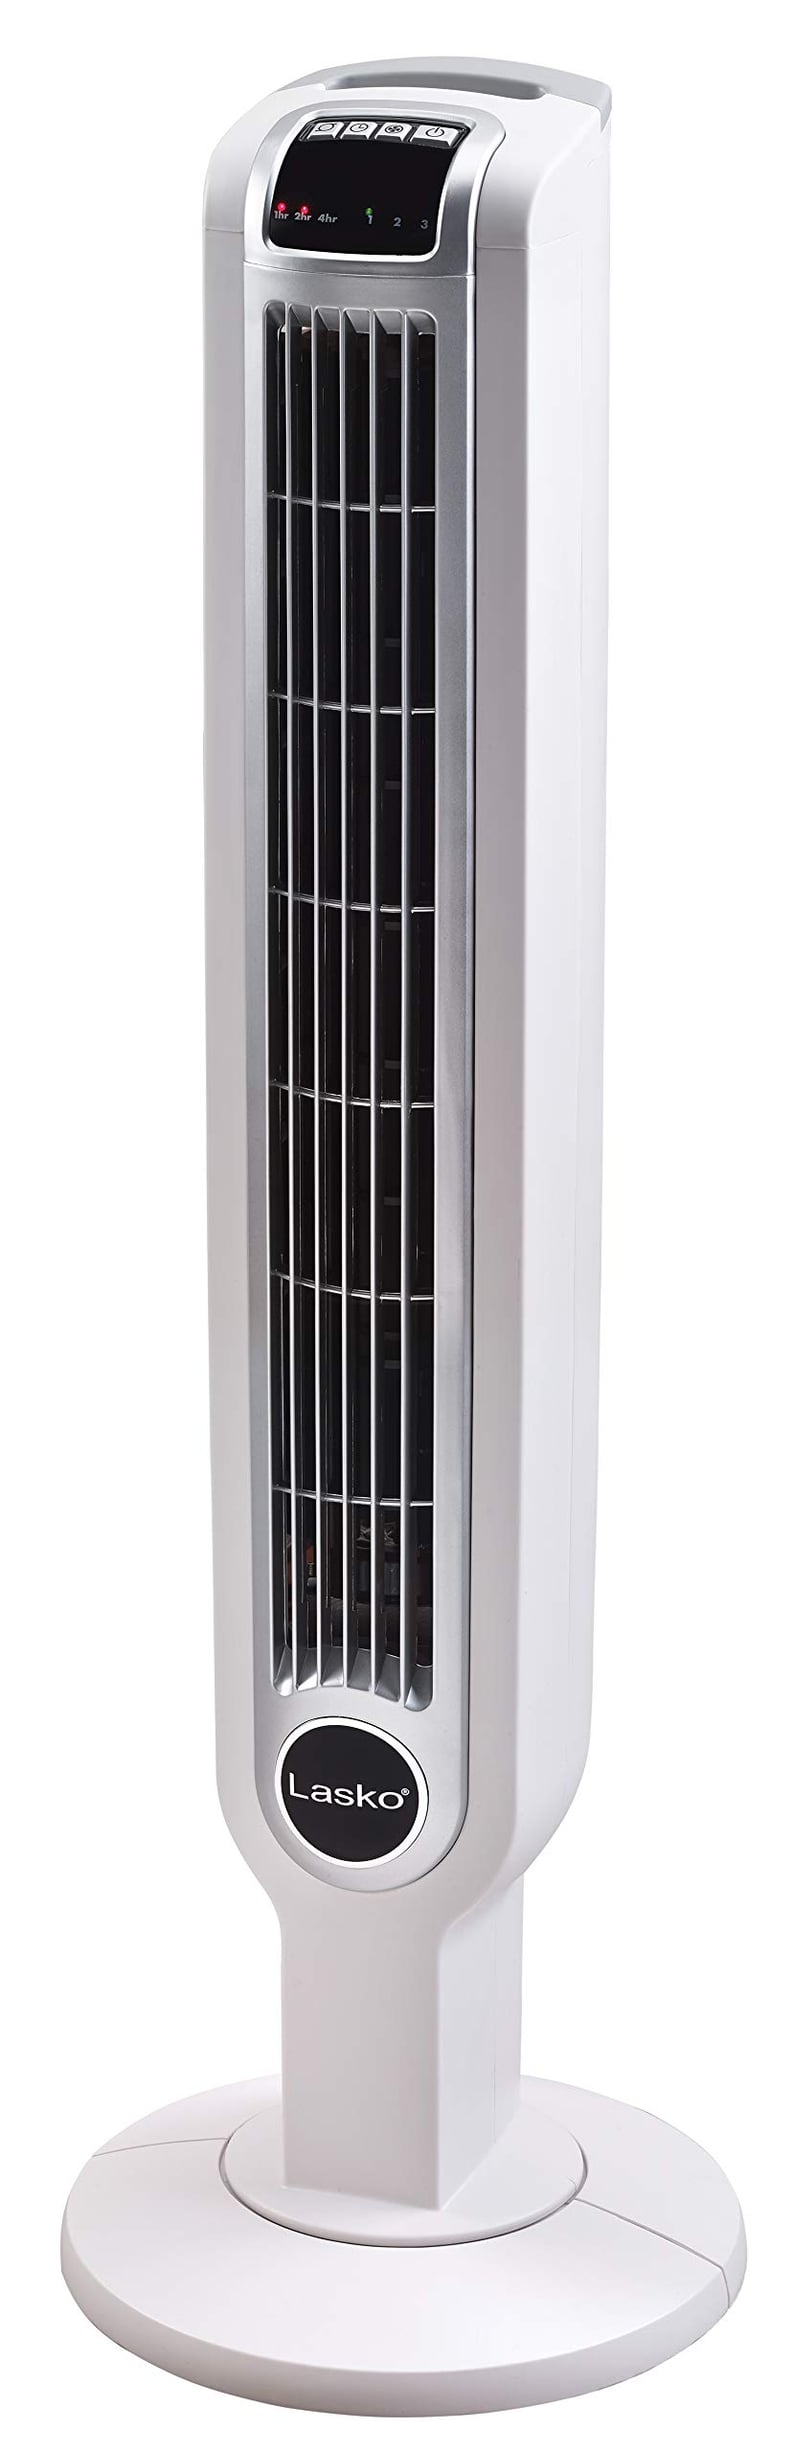 Great Tower Fan For Small Apartments